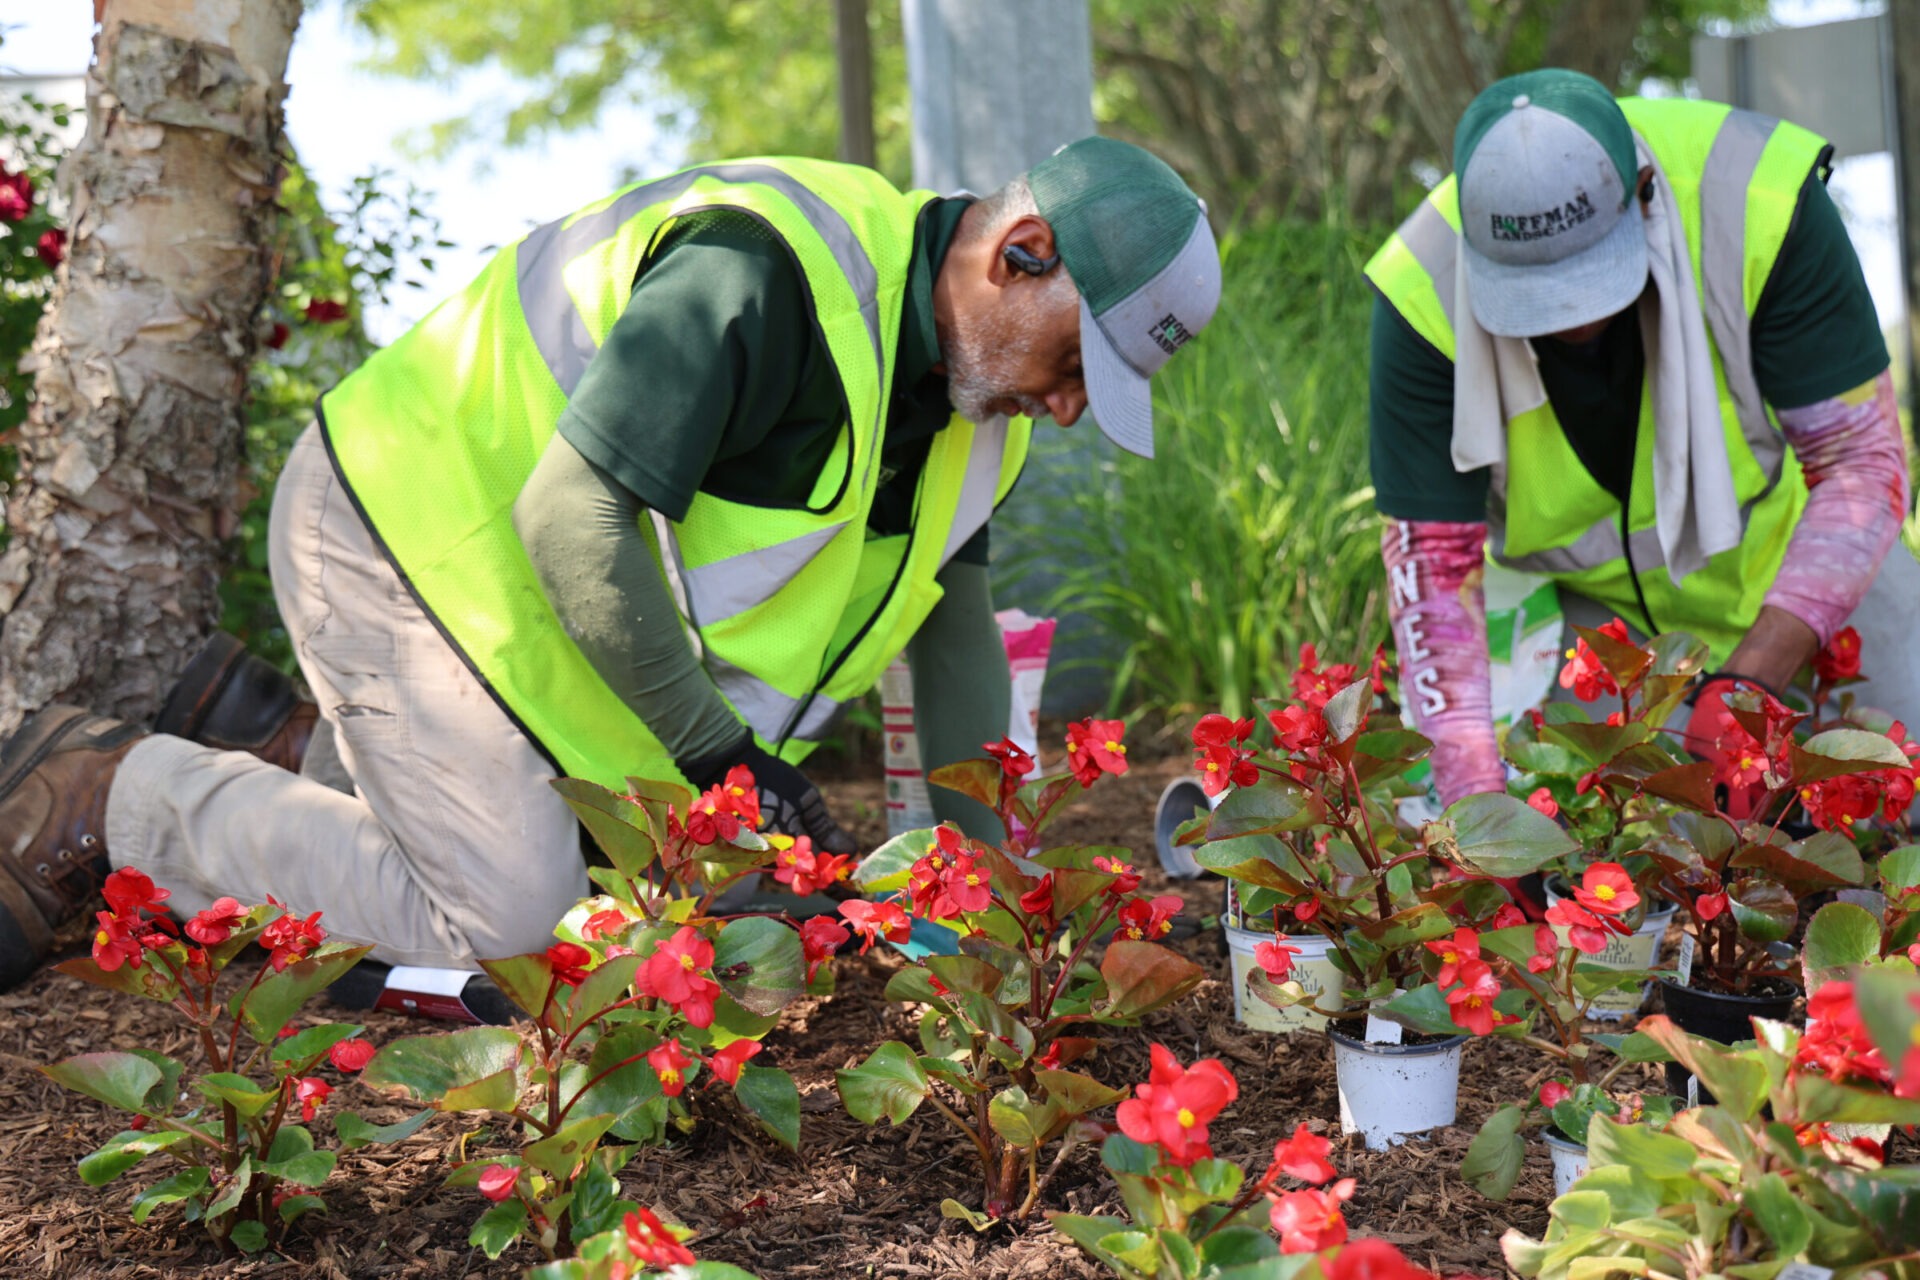 Two people are kneeling and planting red flowers in a bright, outdoor garden setting, both wearing gloves, high-visibility vests, and caps.